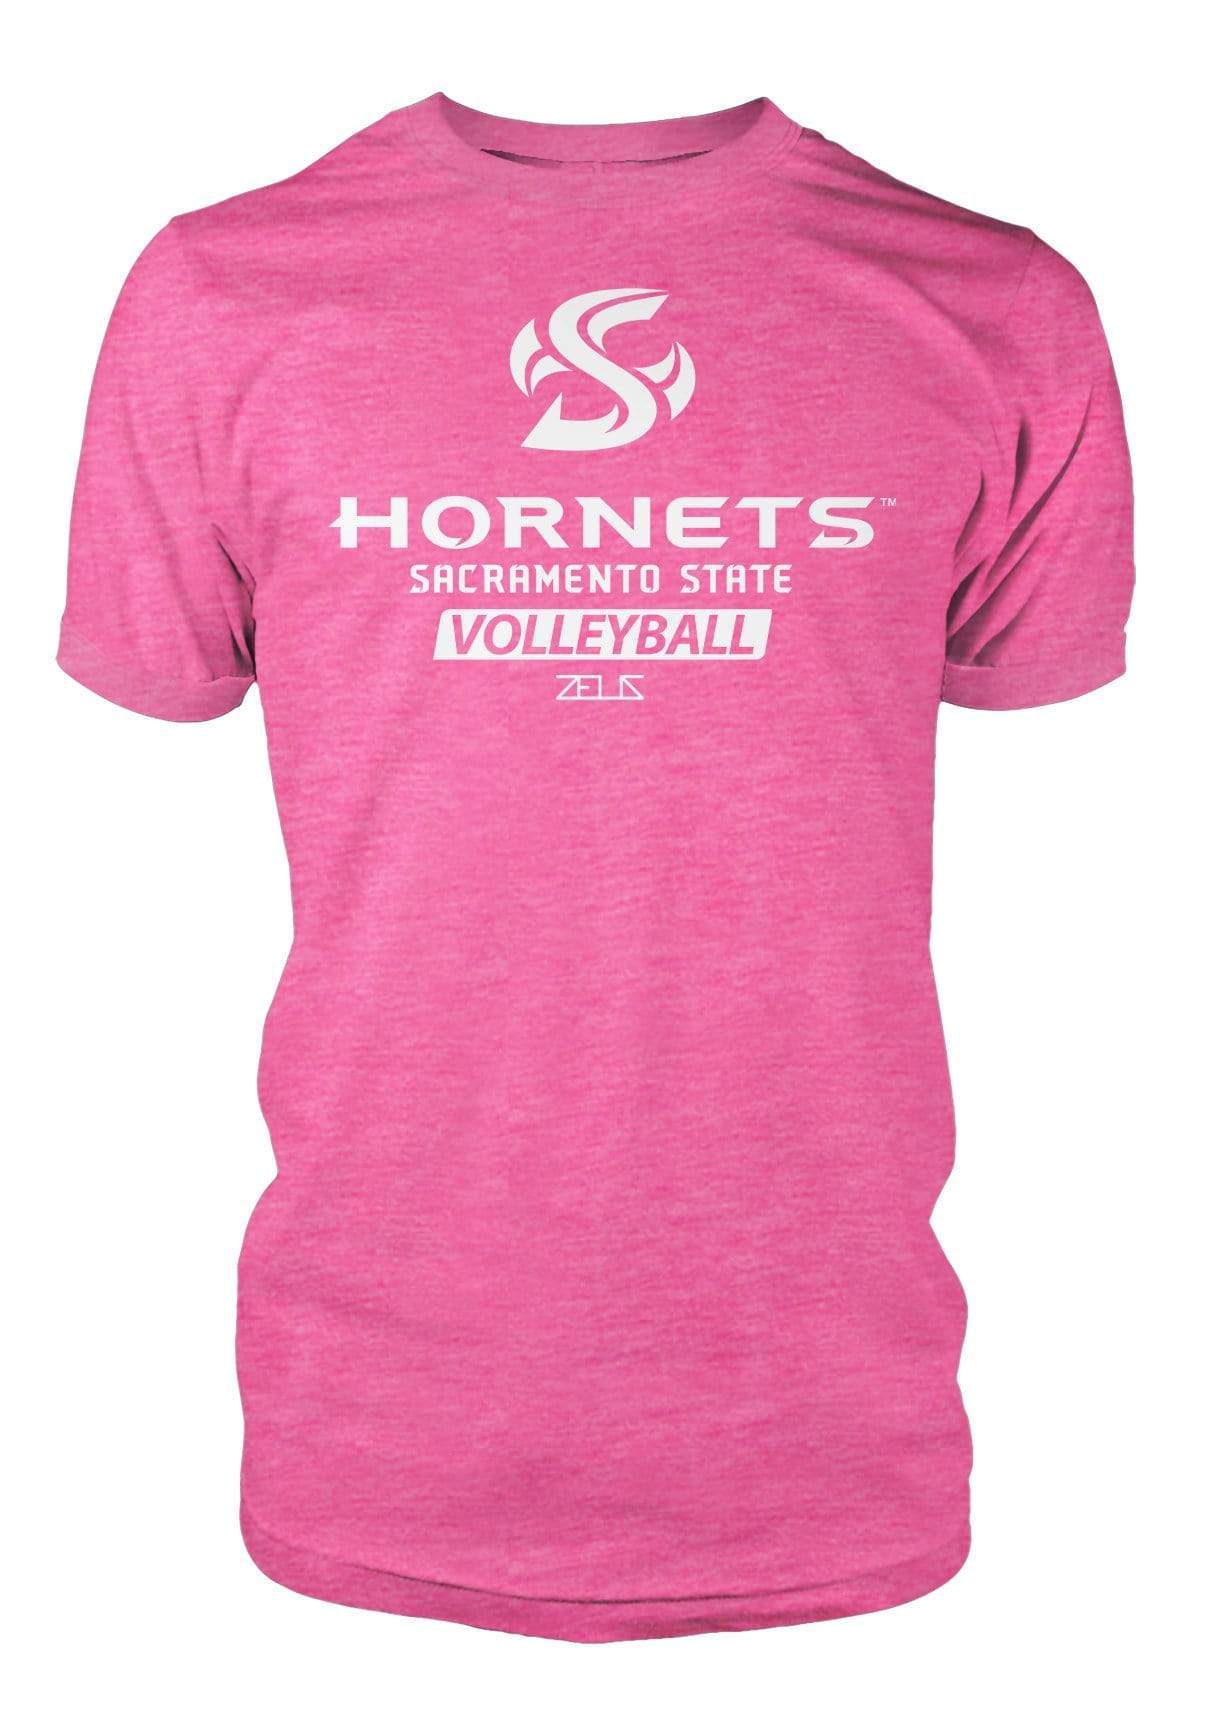 Sacramento State Hornets Sac State Volleyball Division I T-shirt by Zeus Collegiate